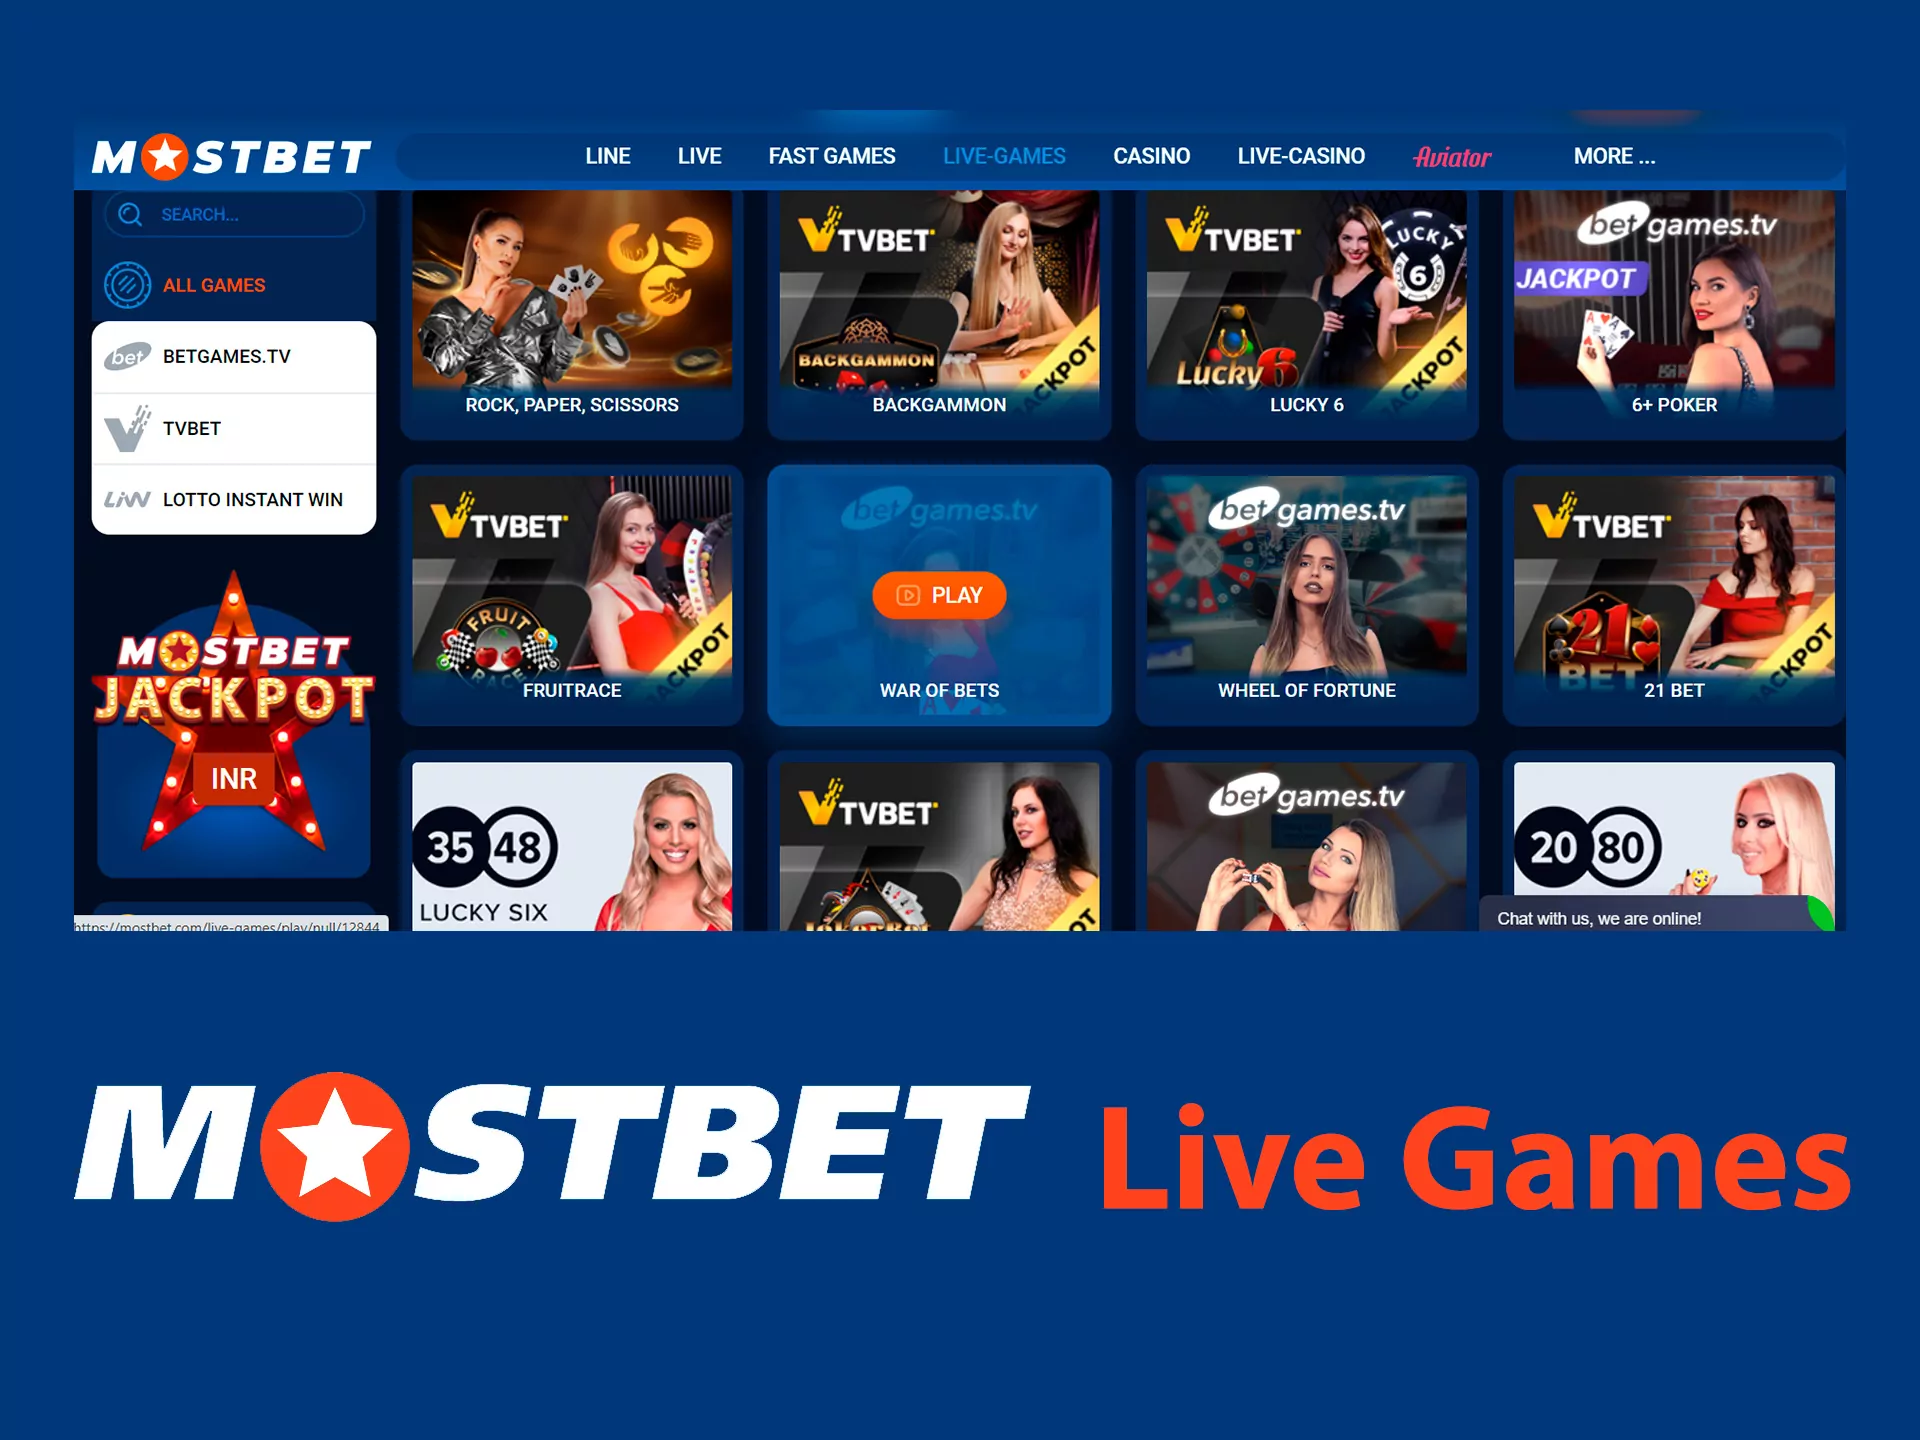 Live games at Mostbet.